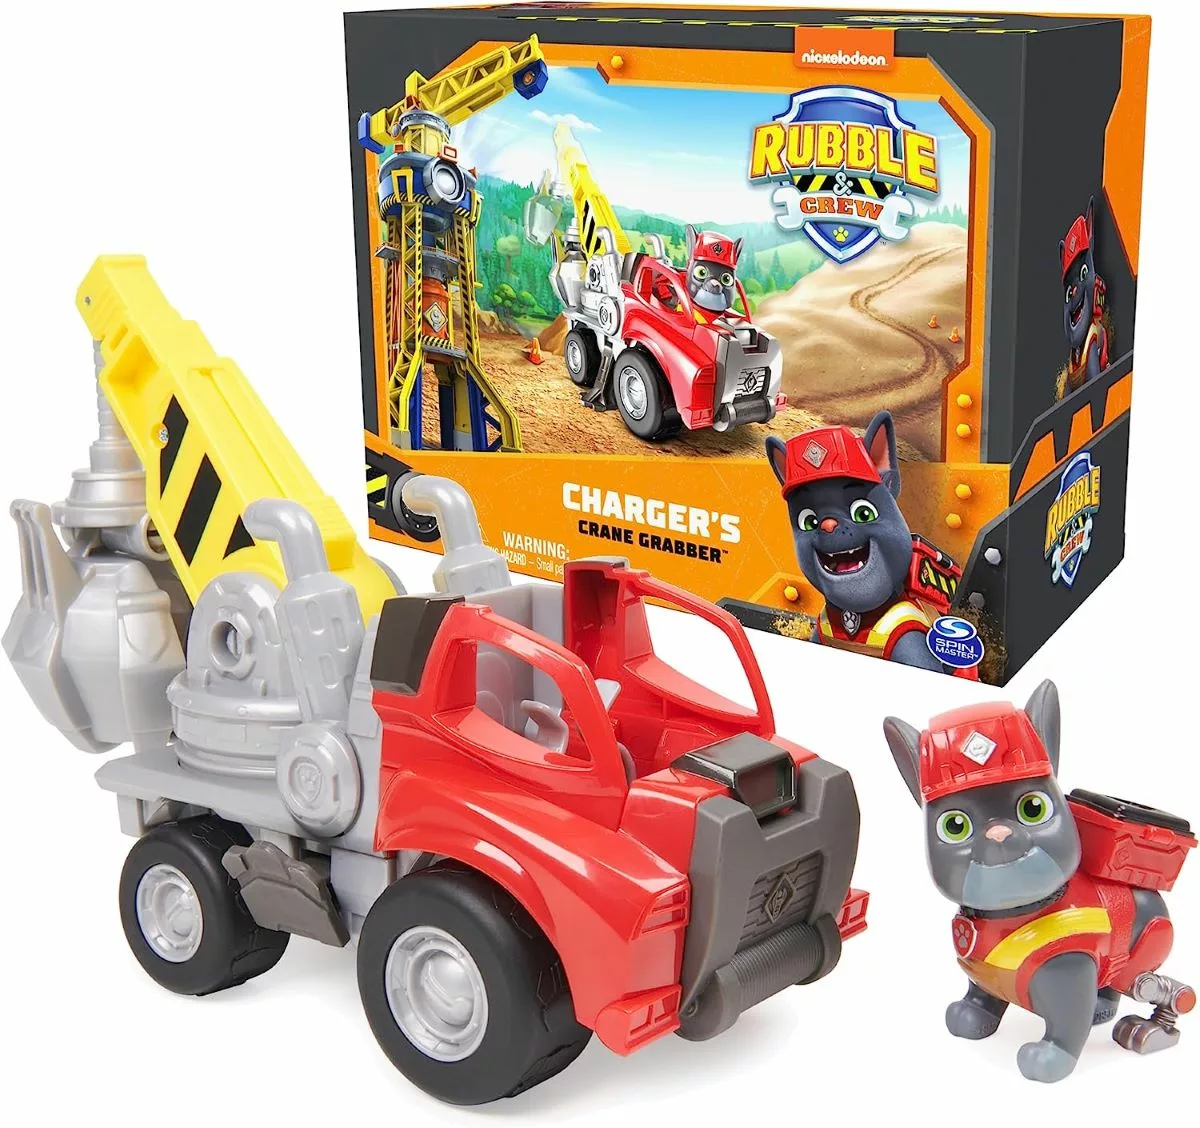 Rubble & Crew Charger’s Crane Grabber Toy Truck